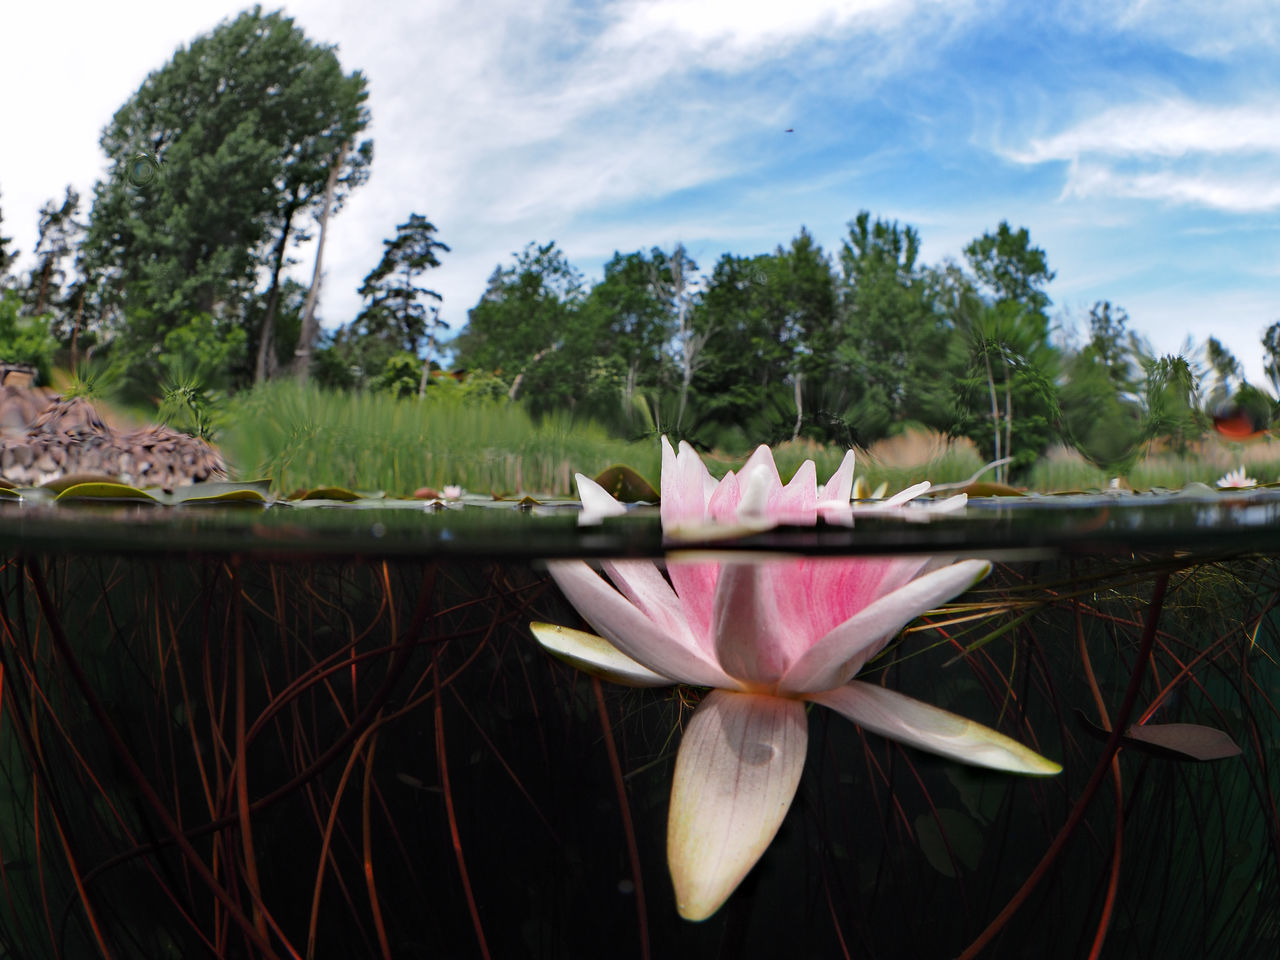 CLOSE-UP OF PINK LOTUS WATER LILY IN POND AGAINST SKY